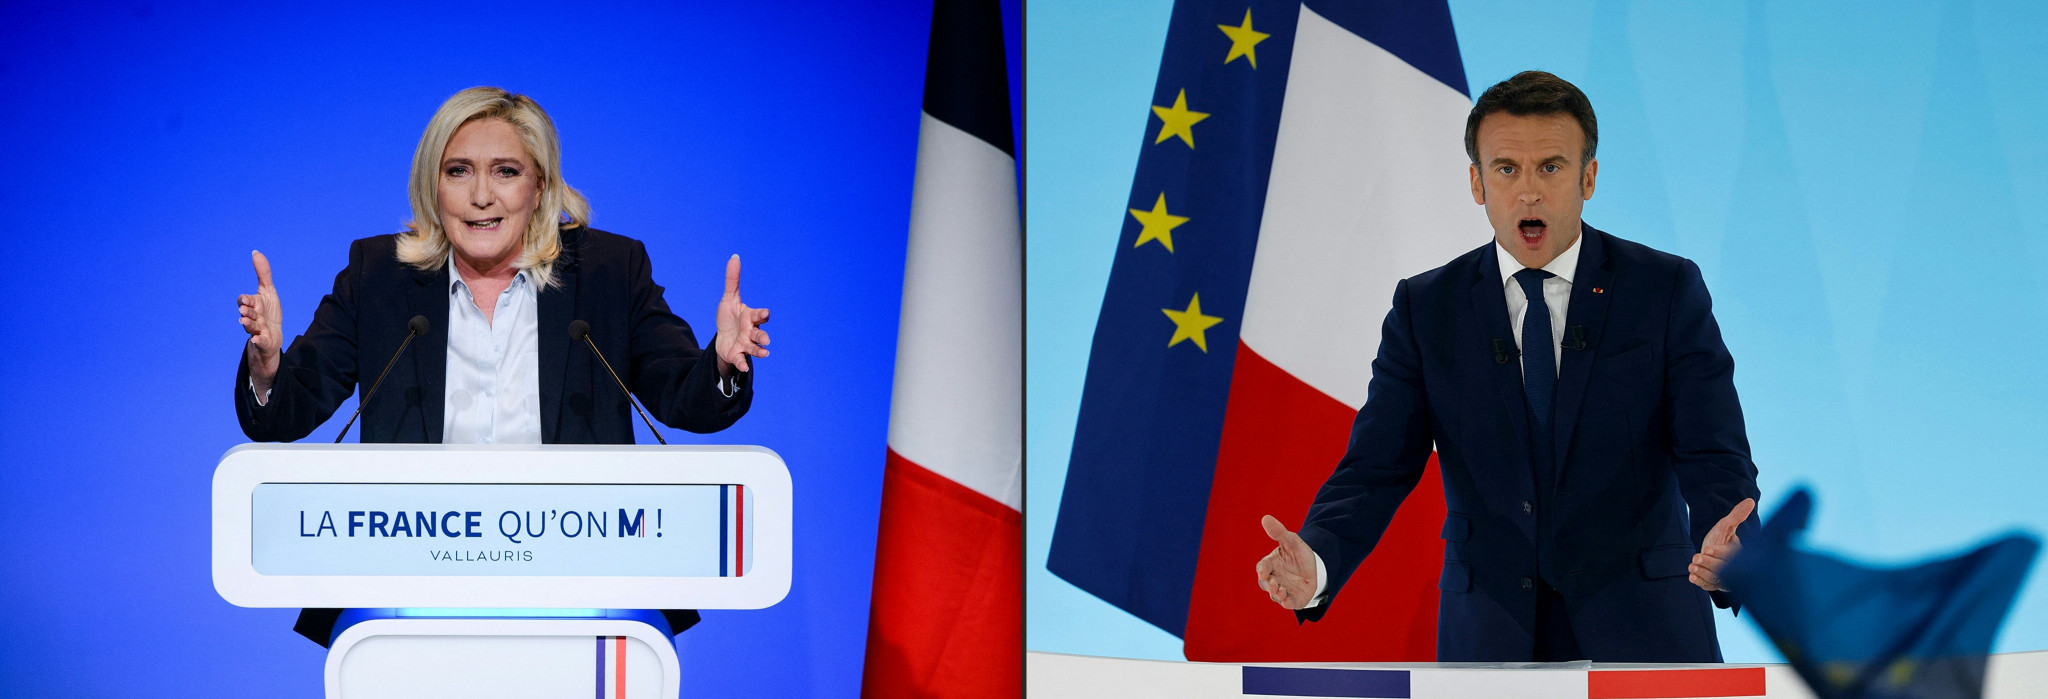 Marine Le Pen, left, and Emmanuel Macron are set to go head-to-head in the French Presidential election run-off later this month ©Getty Images